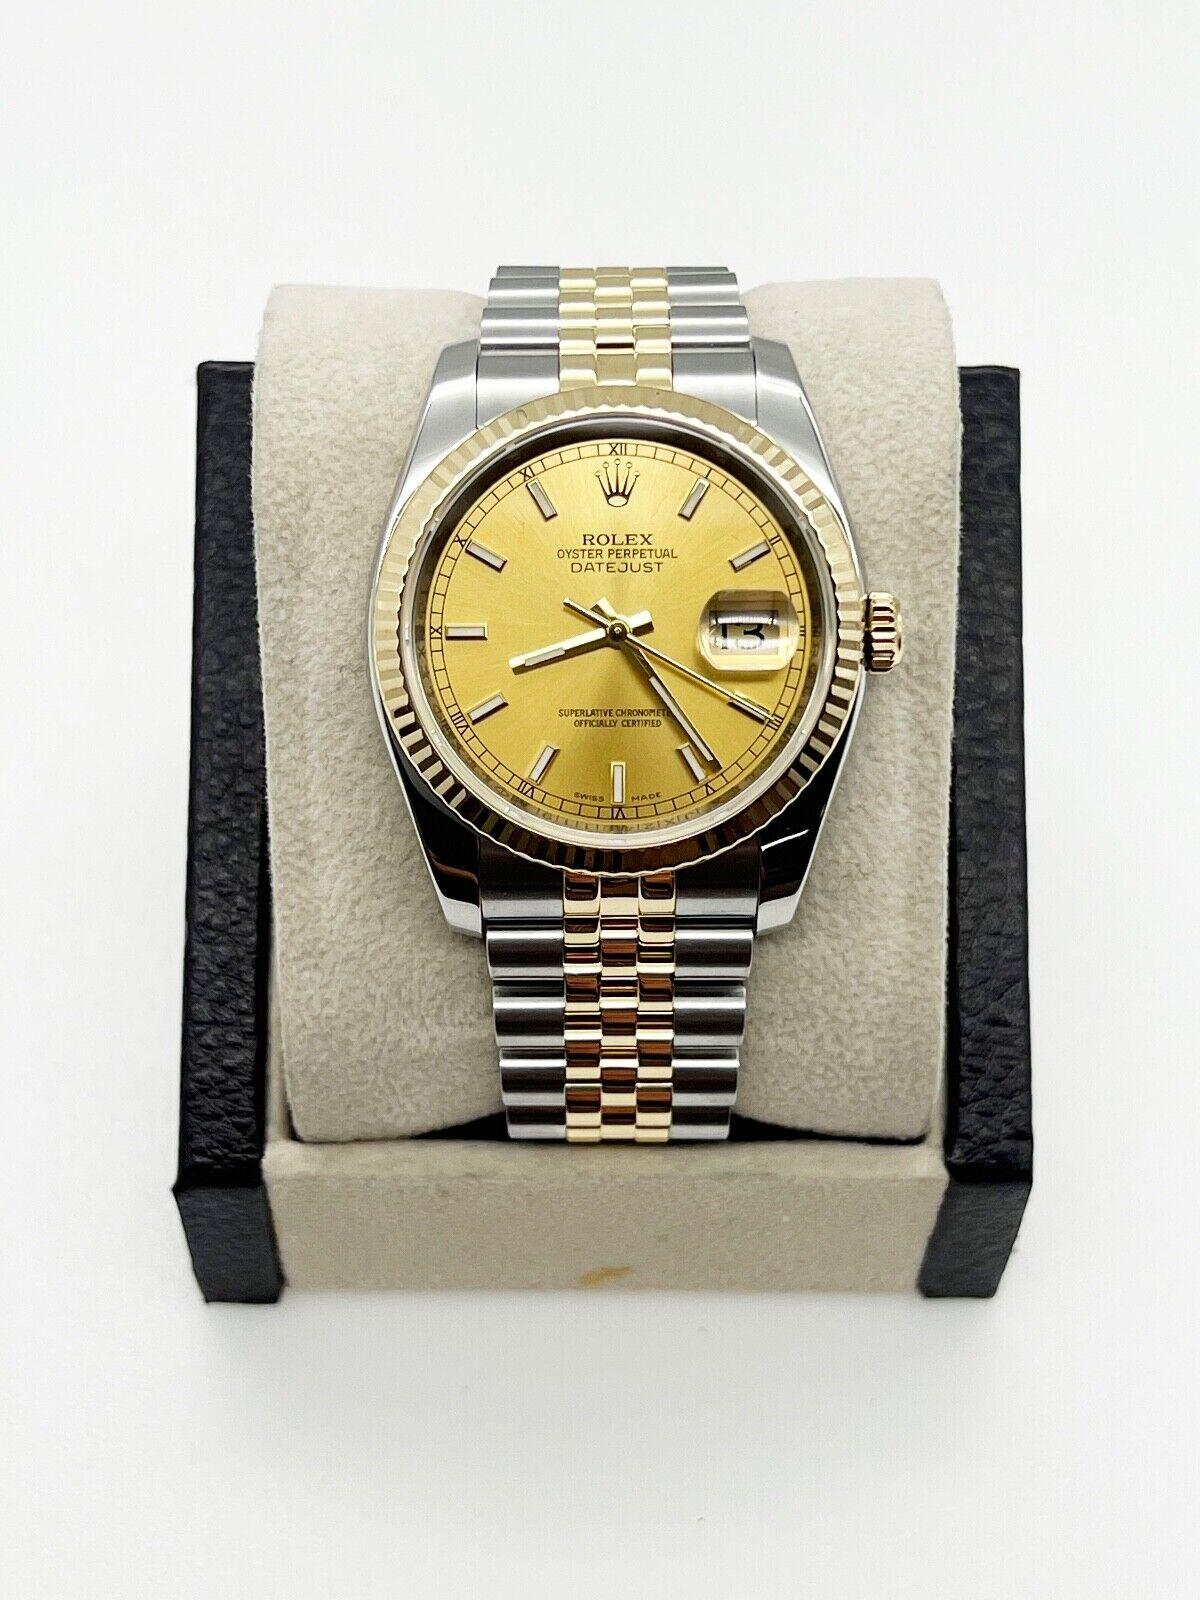 
Style Number: 116233



Serial: JX246***



Year: 2010 - Now

 

Model: Datejust

 

Case Material: Stainless Steel

 

Band: 18K Yellow Gold & Stainless Steel 

  

Bezel: 18K Yellow Gold

 

Dial: Champagne

 

Face: Sapphire Crystal

 

Case